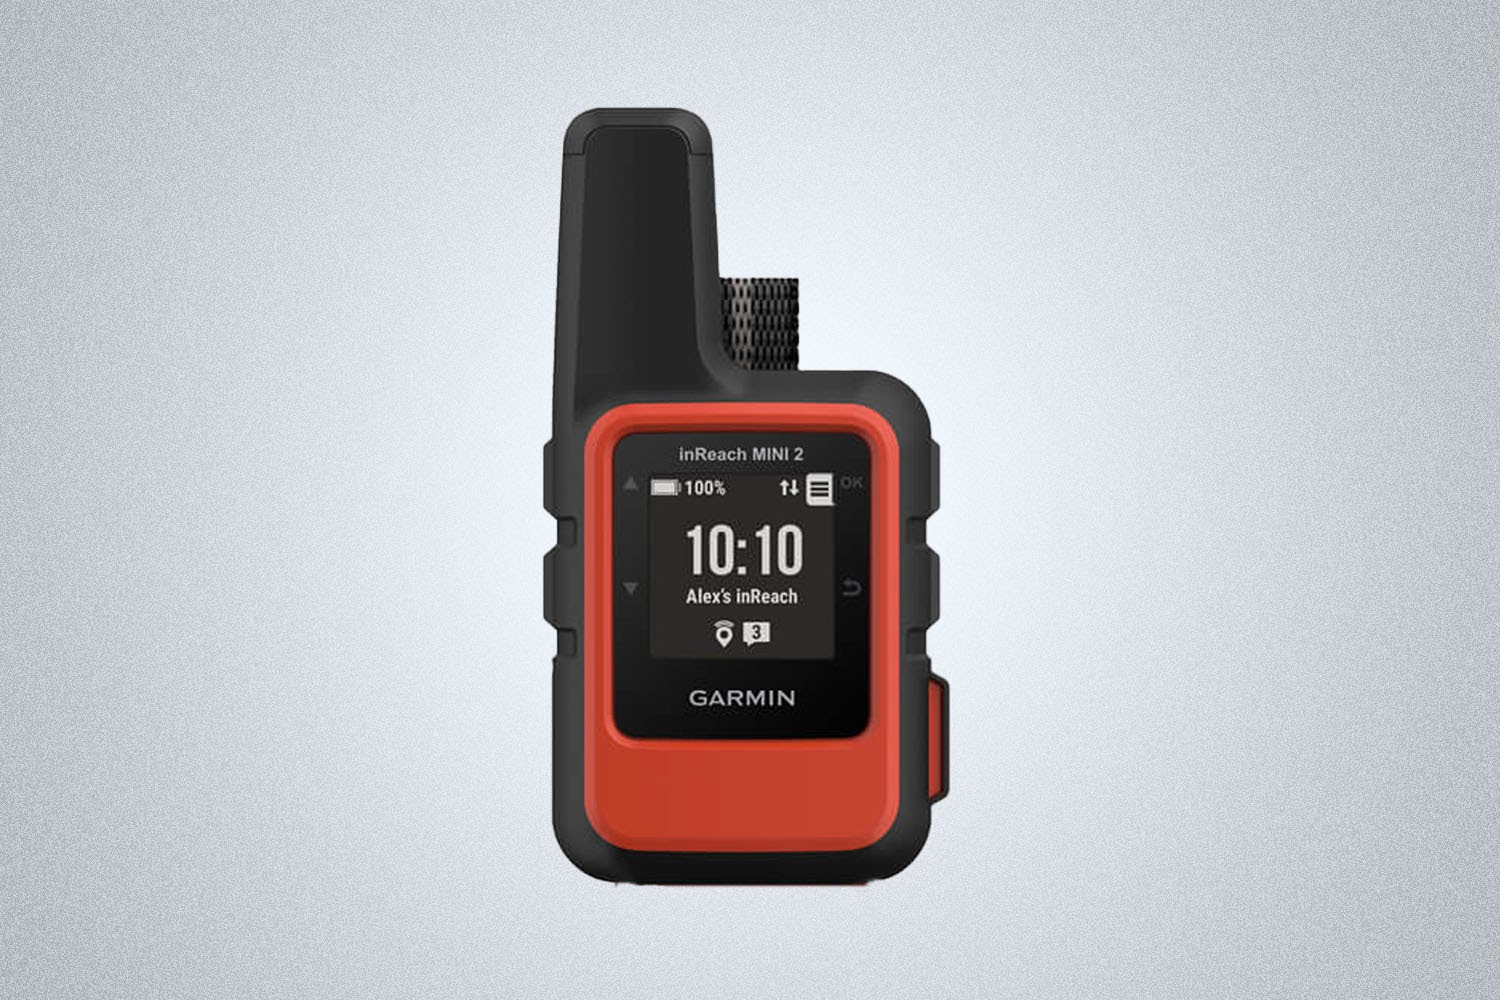 a mobile GPS device from Garmin